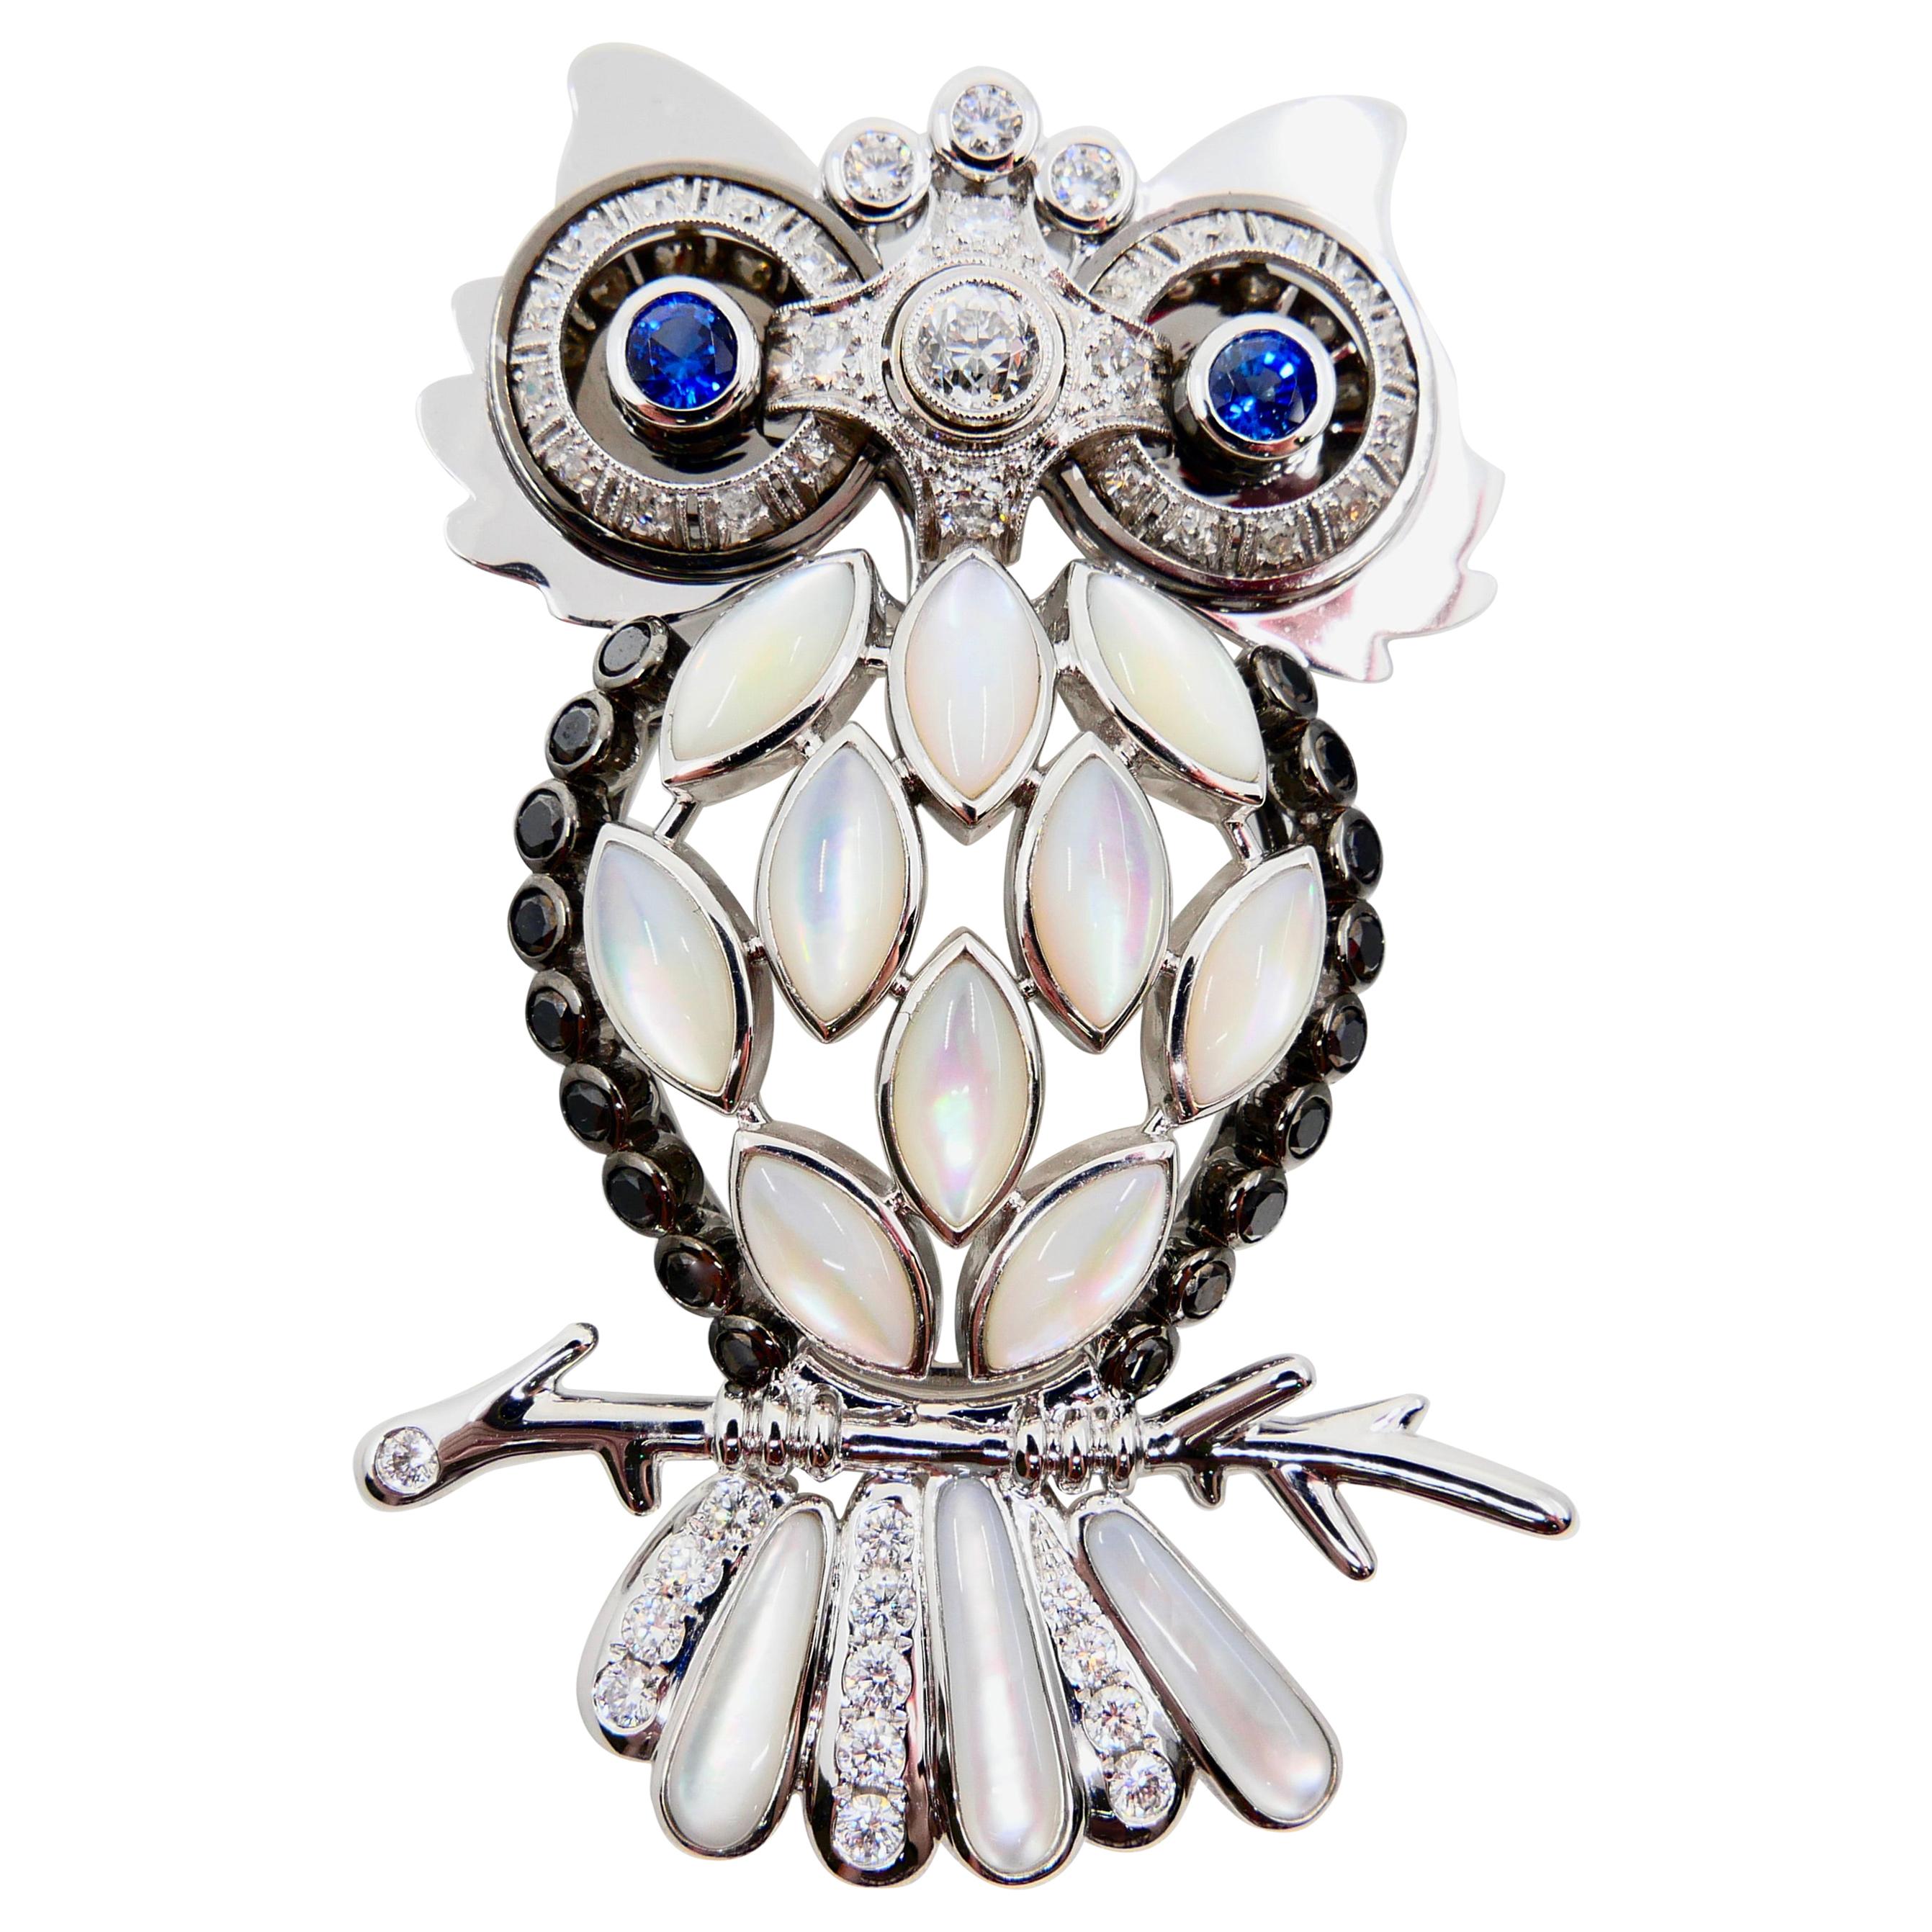 Old Cut and Black Diamonds, Sapphires, White Mother of Pearl Owl Brooch/Pendant For Sale